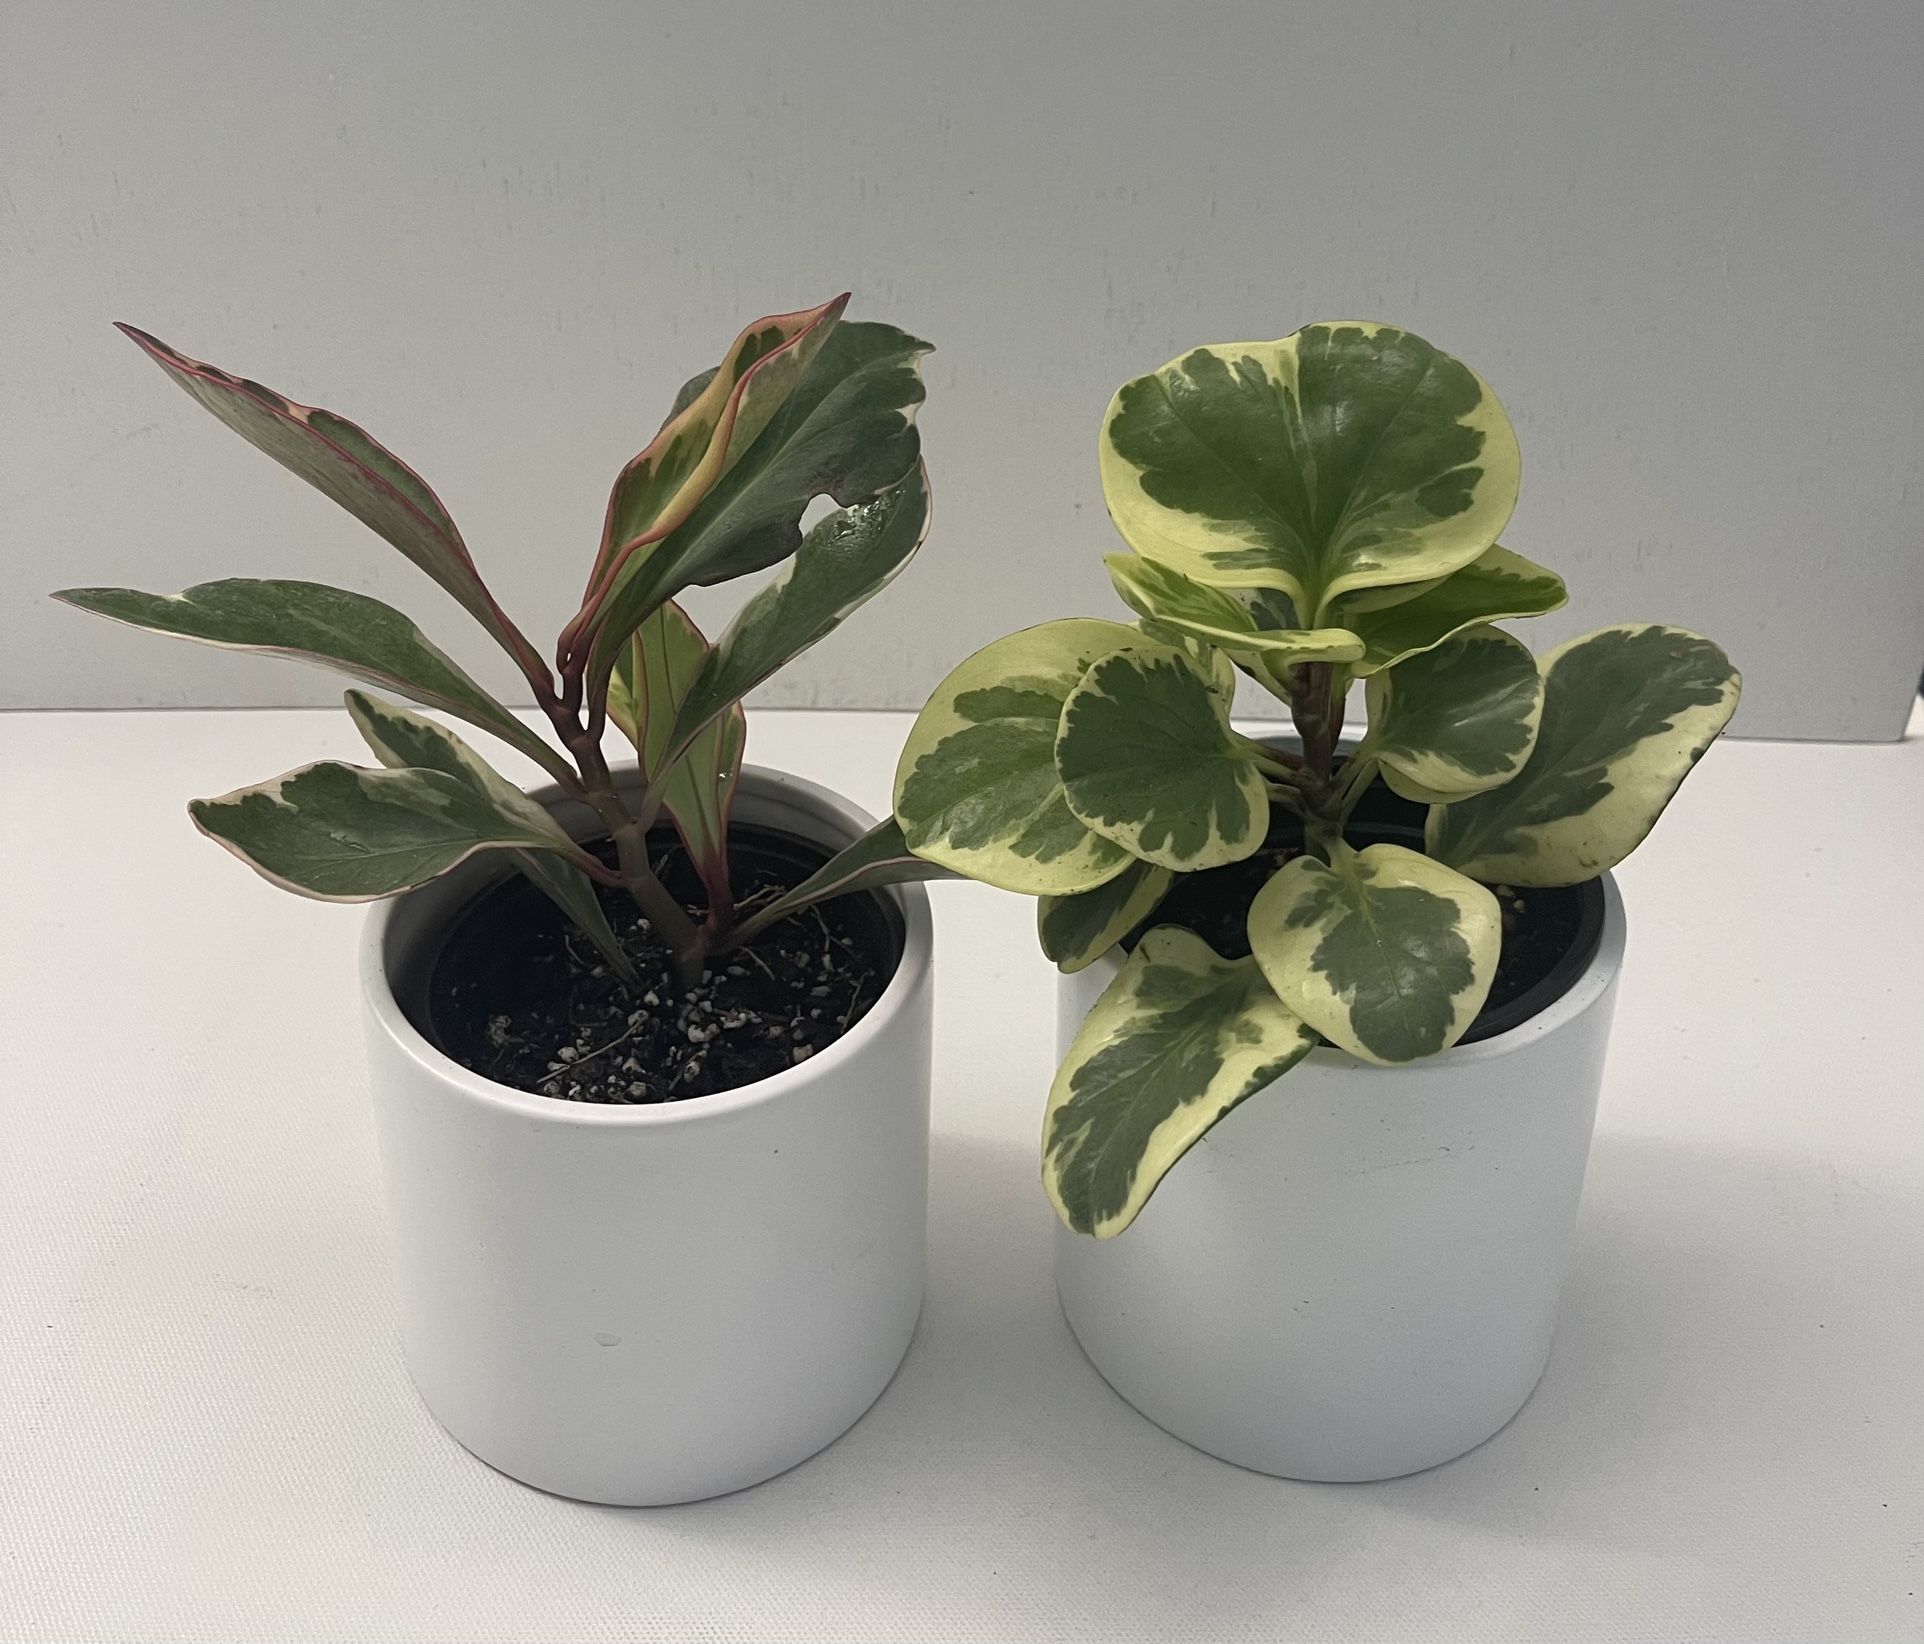 Tricolor & Variegated Peperomia plant